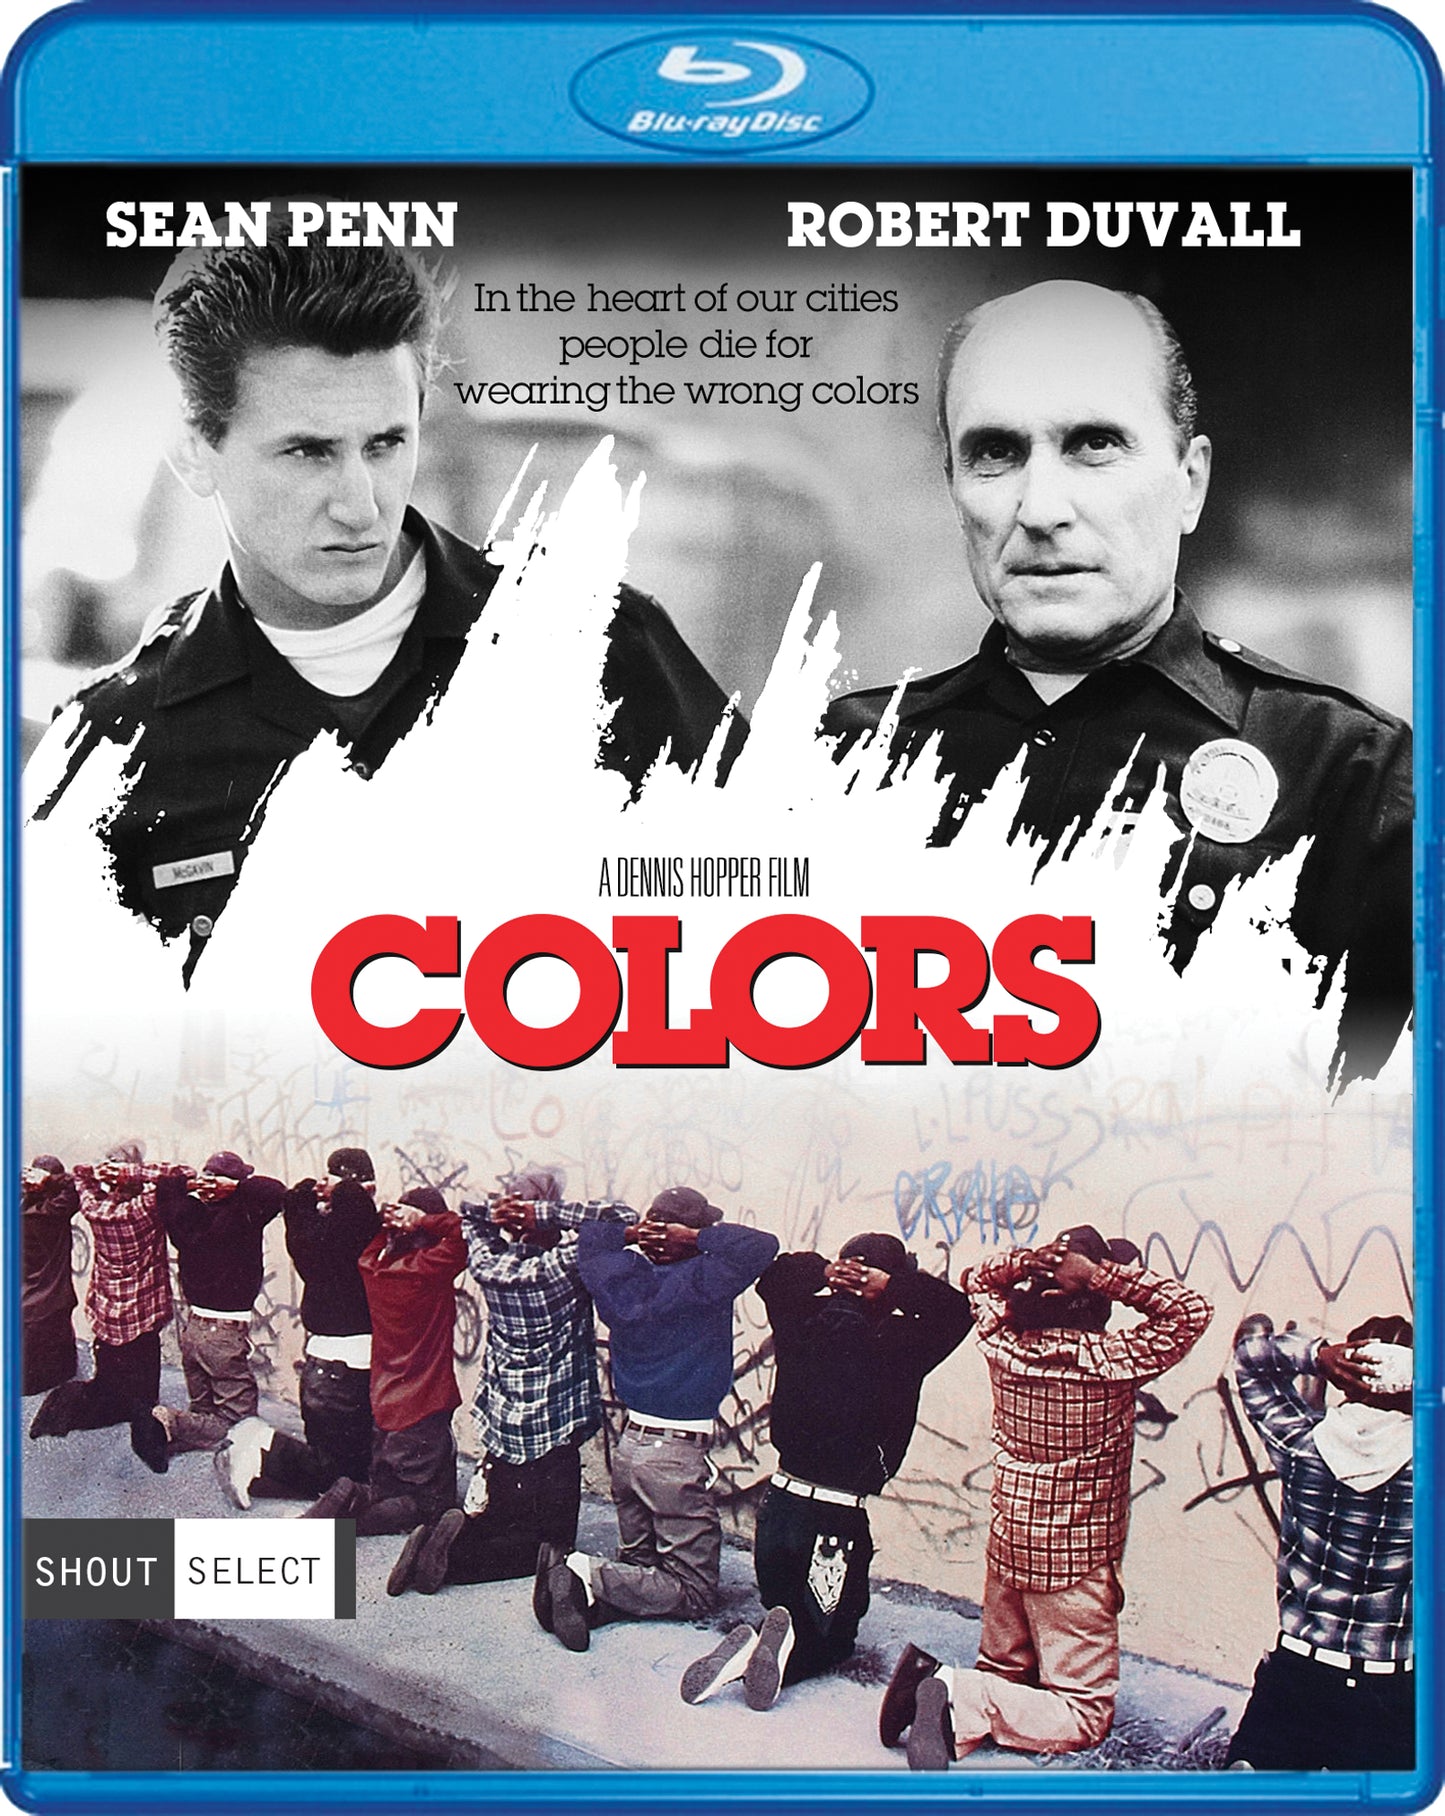 Colors [Blu-ray] cover art